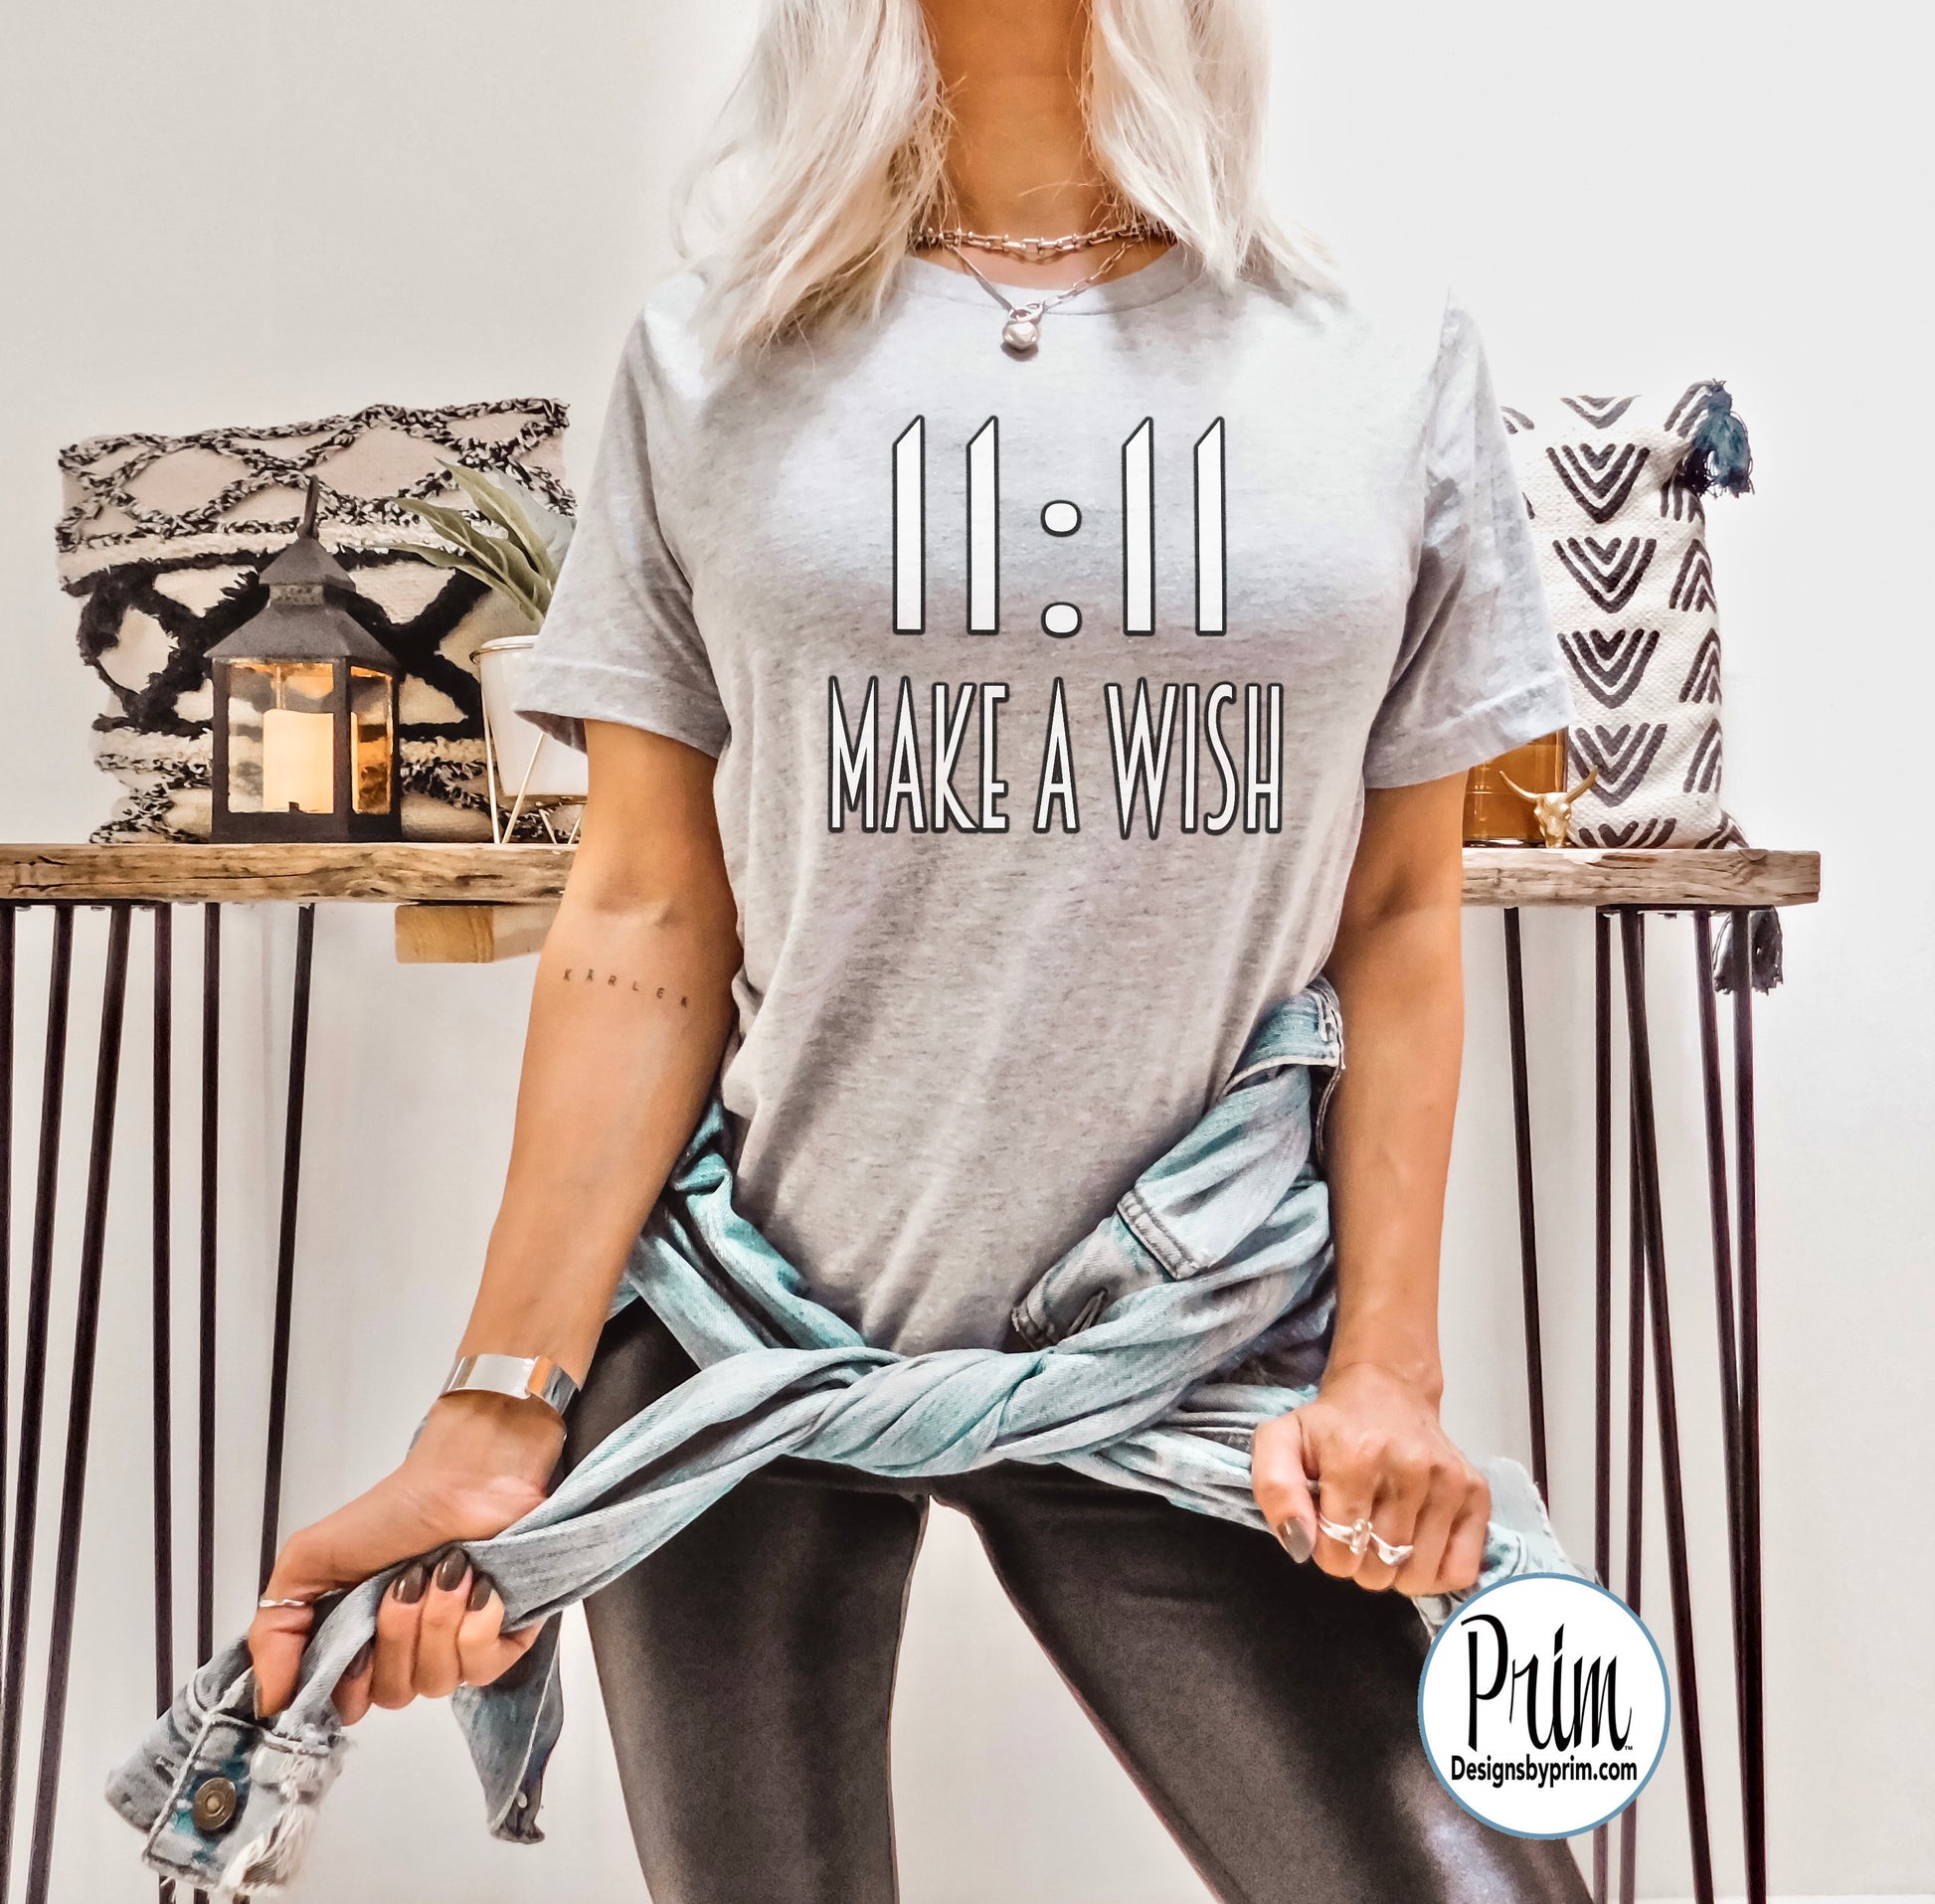 Designs by Prim 11:11 Make a Wish Soft Unisex T-Shirt | Spiritual New Age Chance Coincidence Numerology Angel Synchronicity Graphic Tee Top